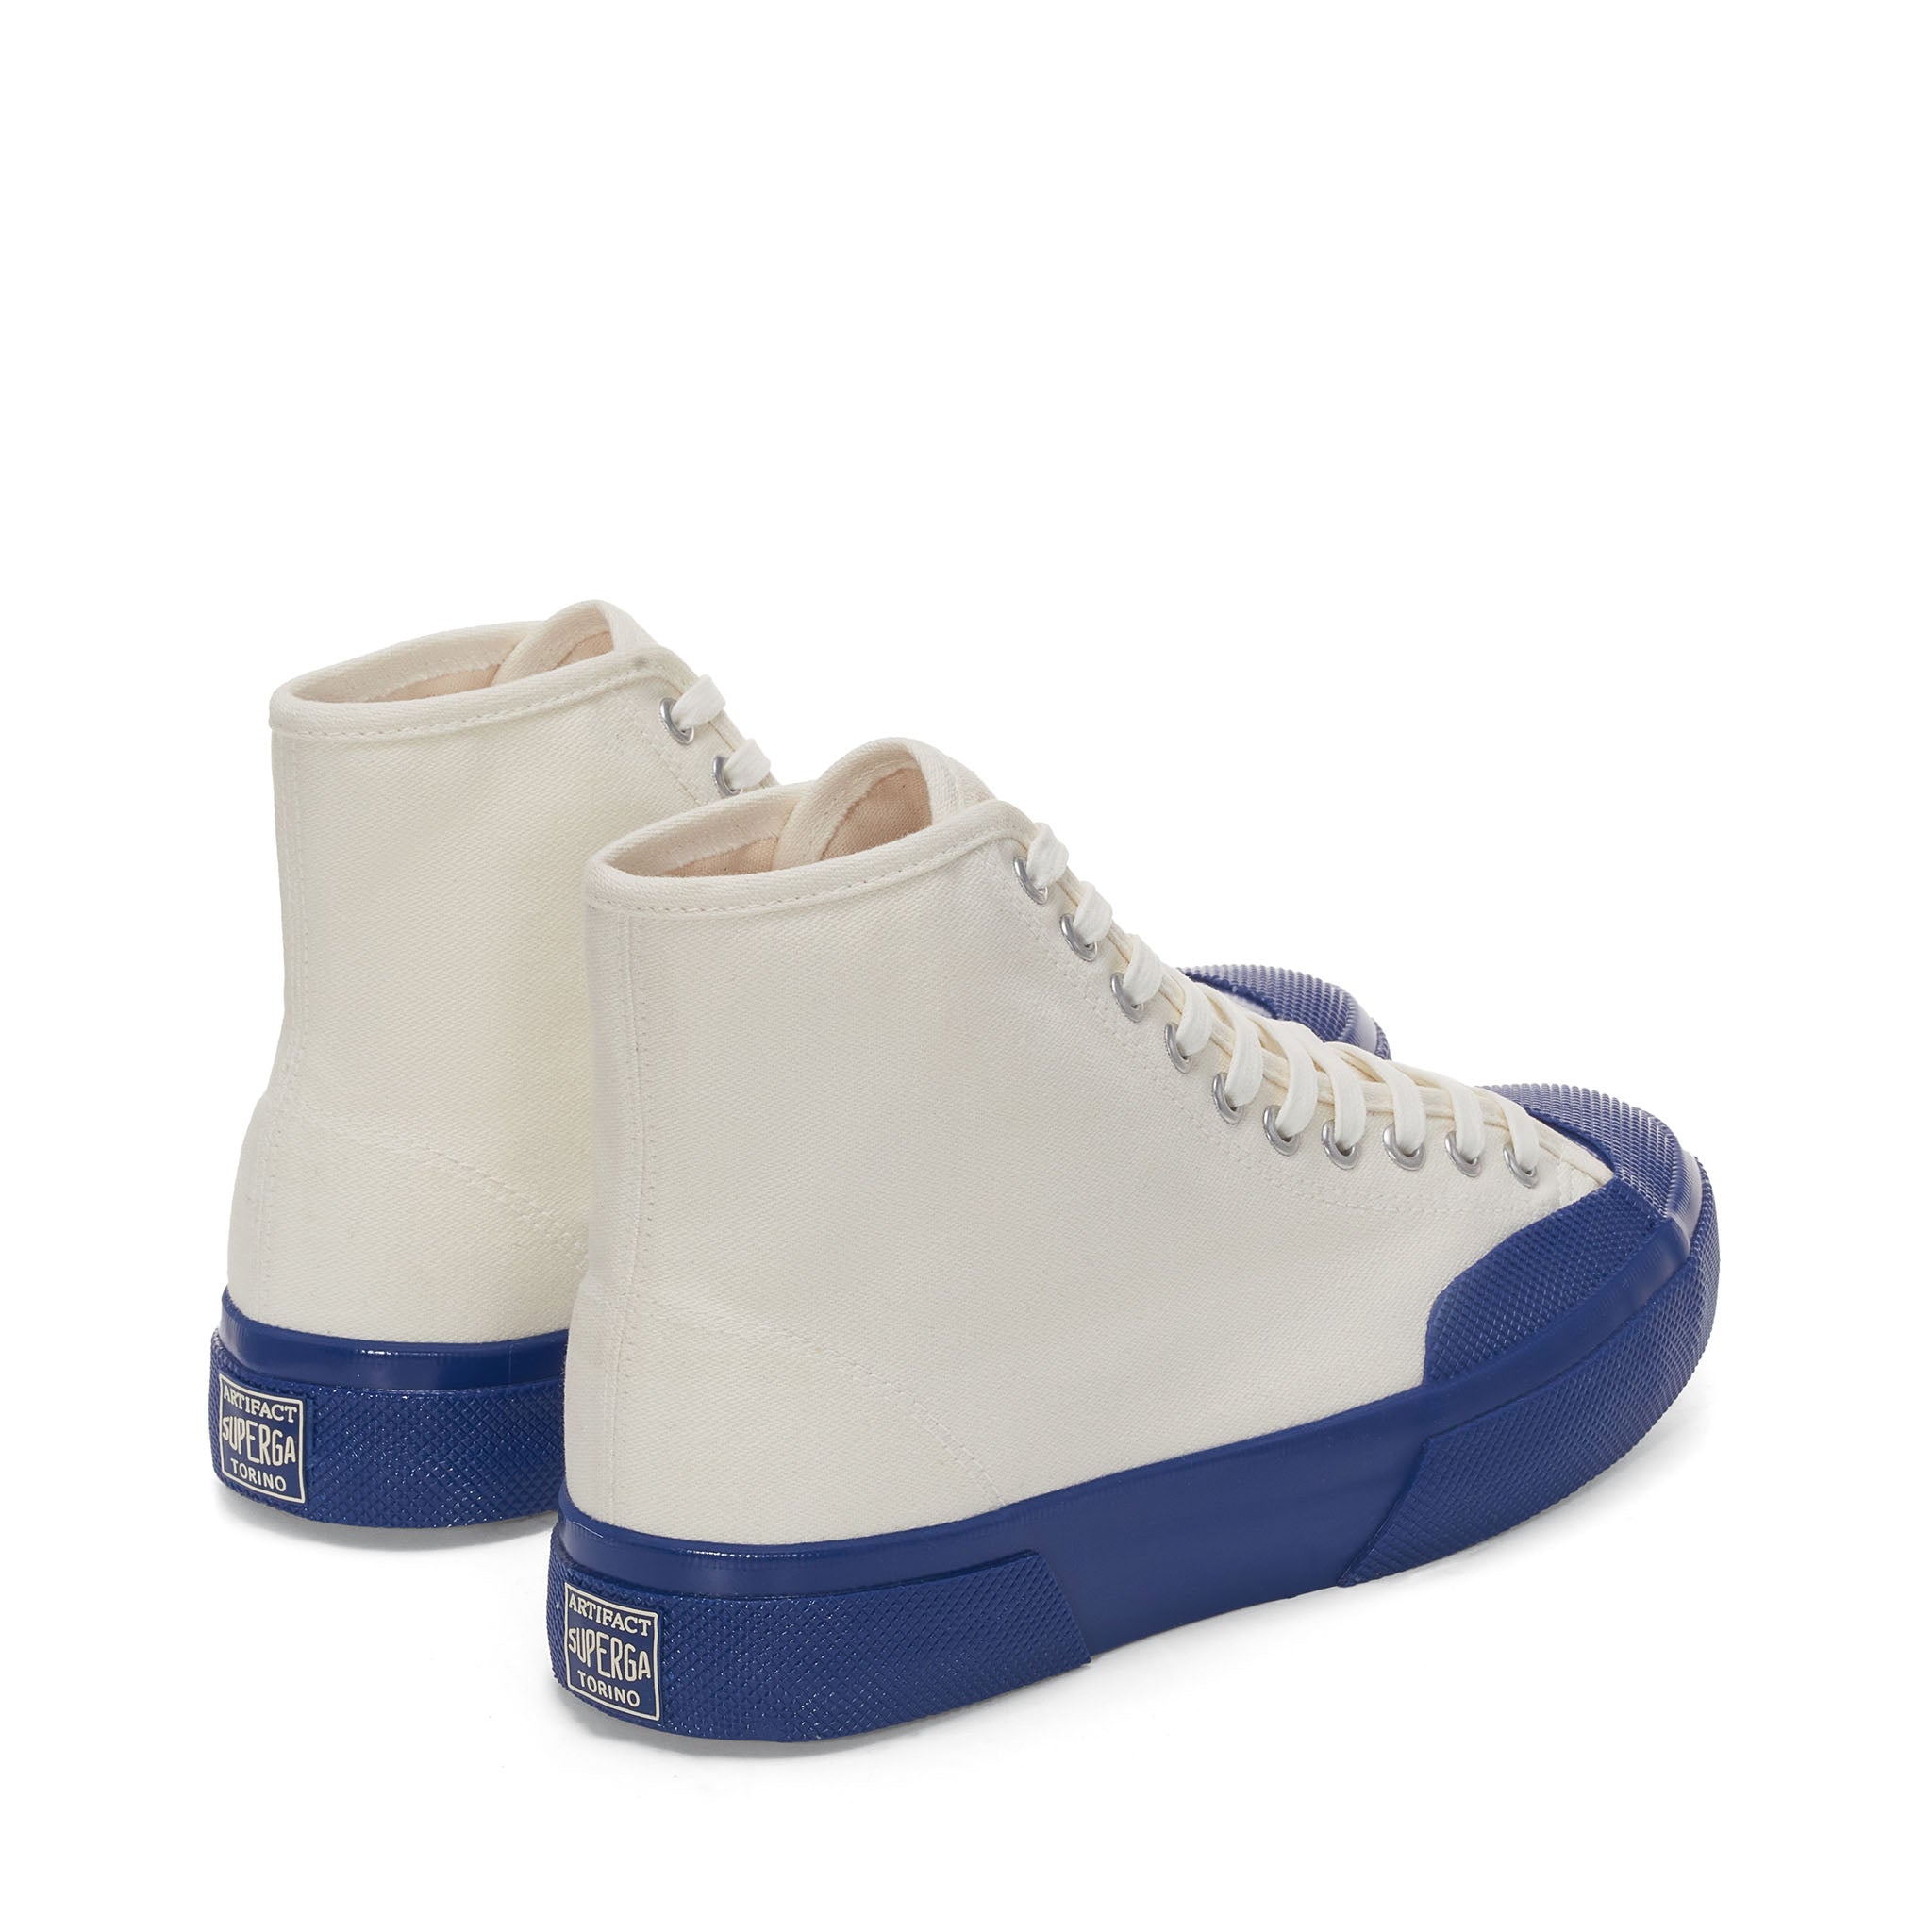 Superga 2433 Collect Workwear Sneakers - White / Blue. Back view.